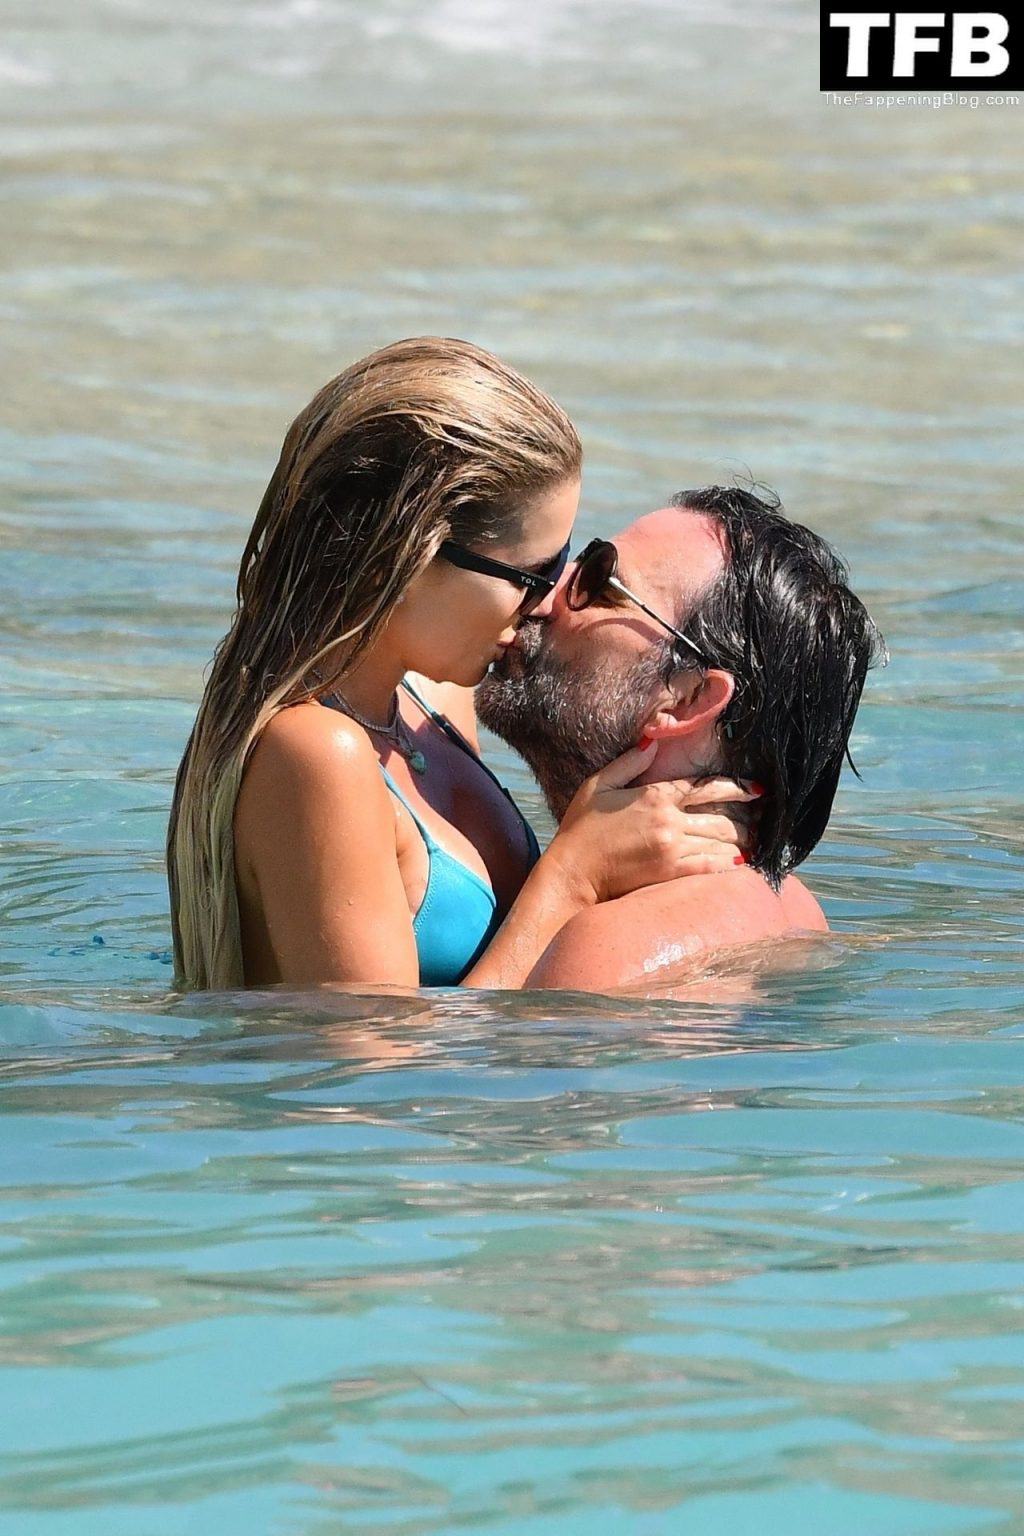 Sylvie Meis Looks Stunning in a Blue Bikini Relaxing on the Beach in St Barts (62 New Photos)